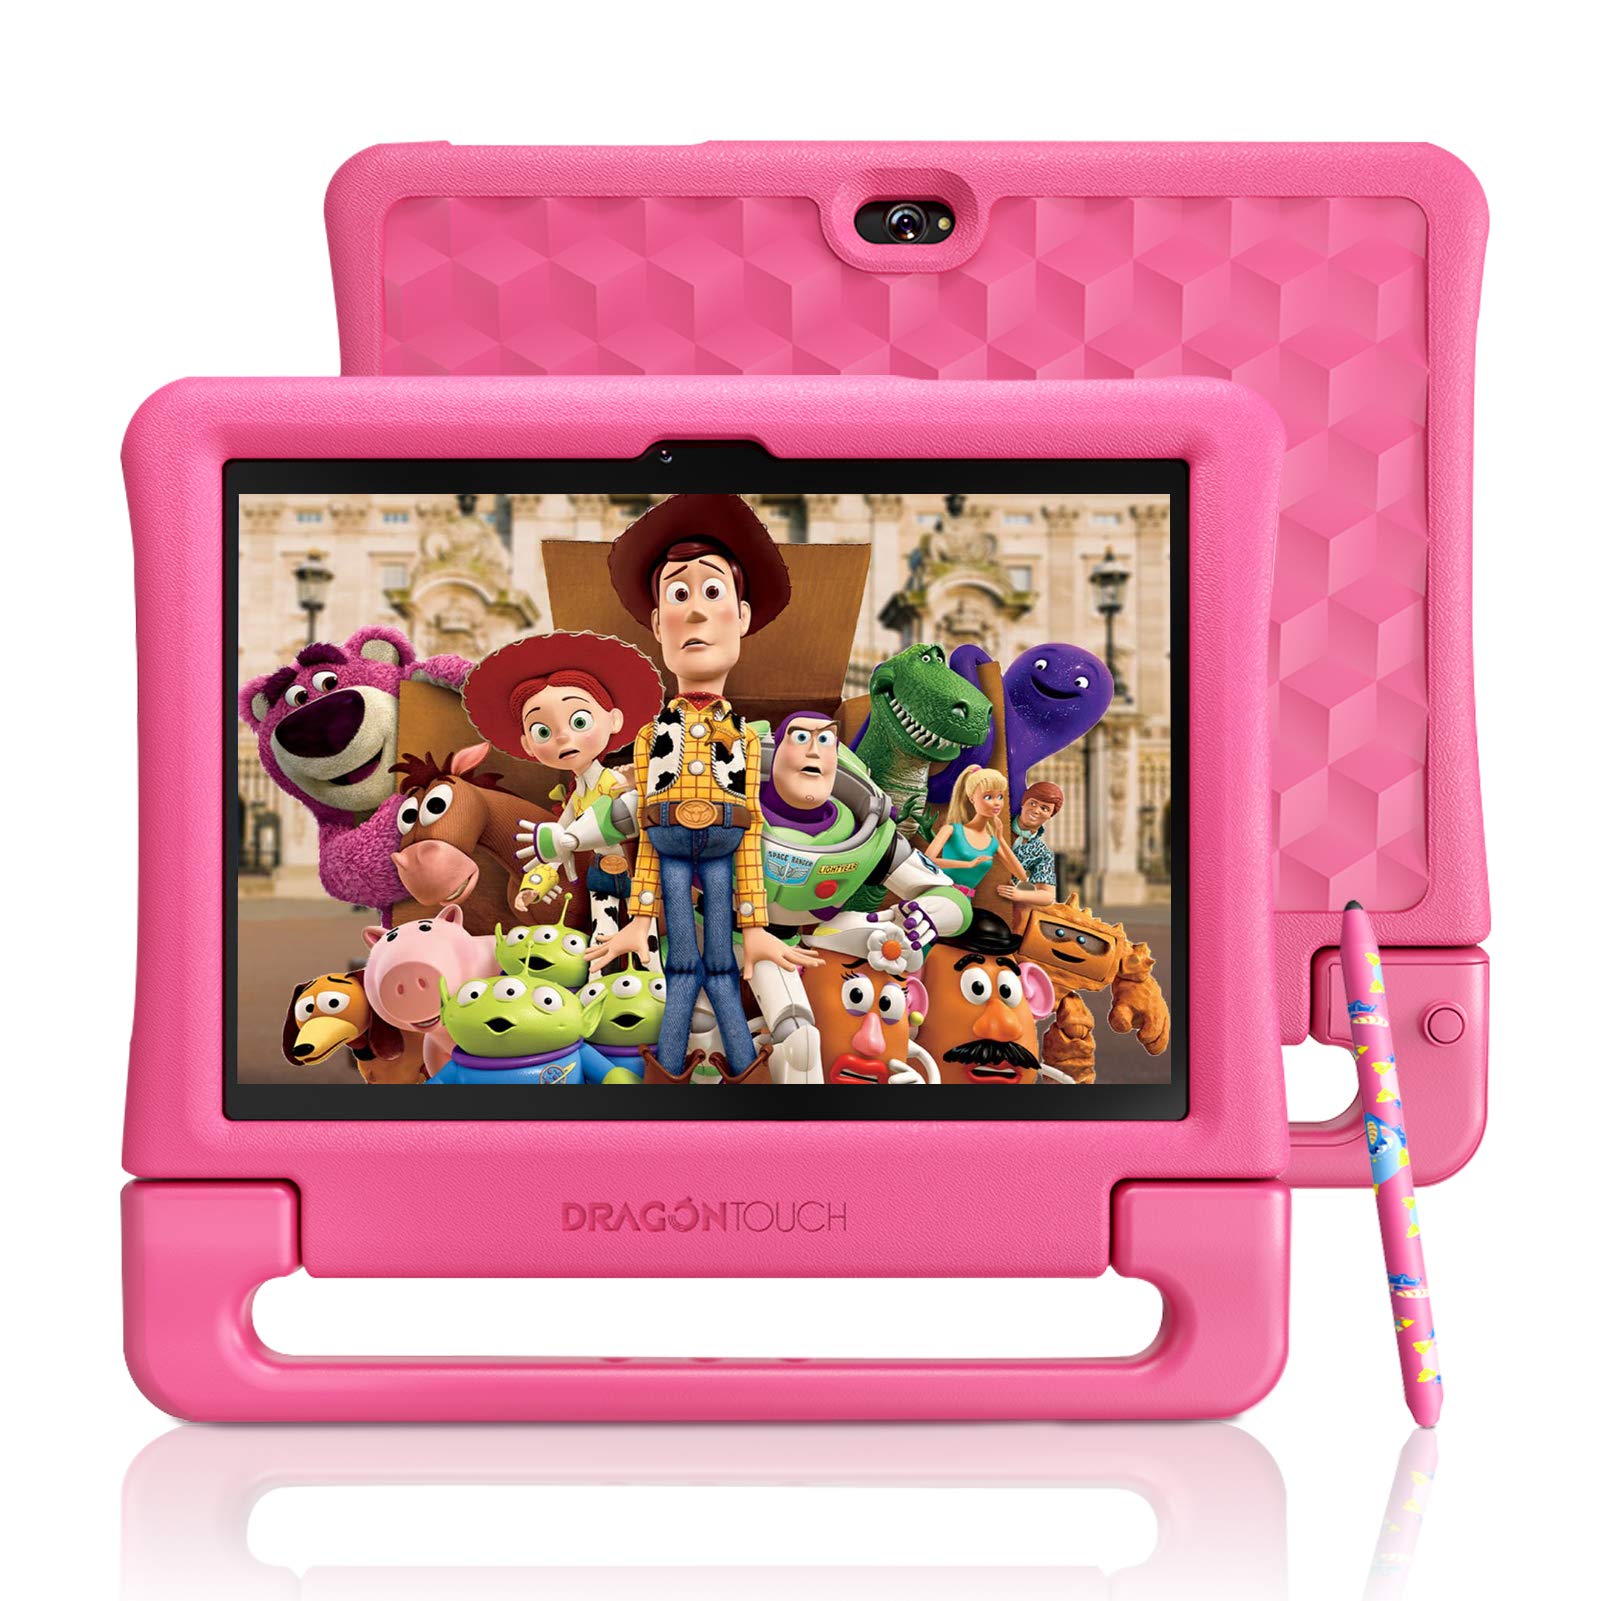 Dragon Touch Kids Tablet 10 inch IPS HD Display Android Tablets with 32GB Storage, 2GB RAM, Quad Core Processor, KIDOZ Pre-Installed, Kid-Proof Case, Shoulder Strap and Stylus, WiFi Only – Pink